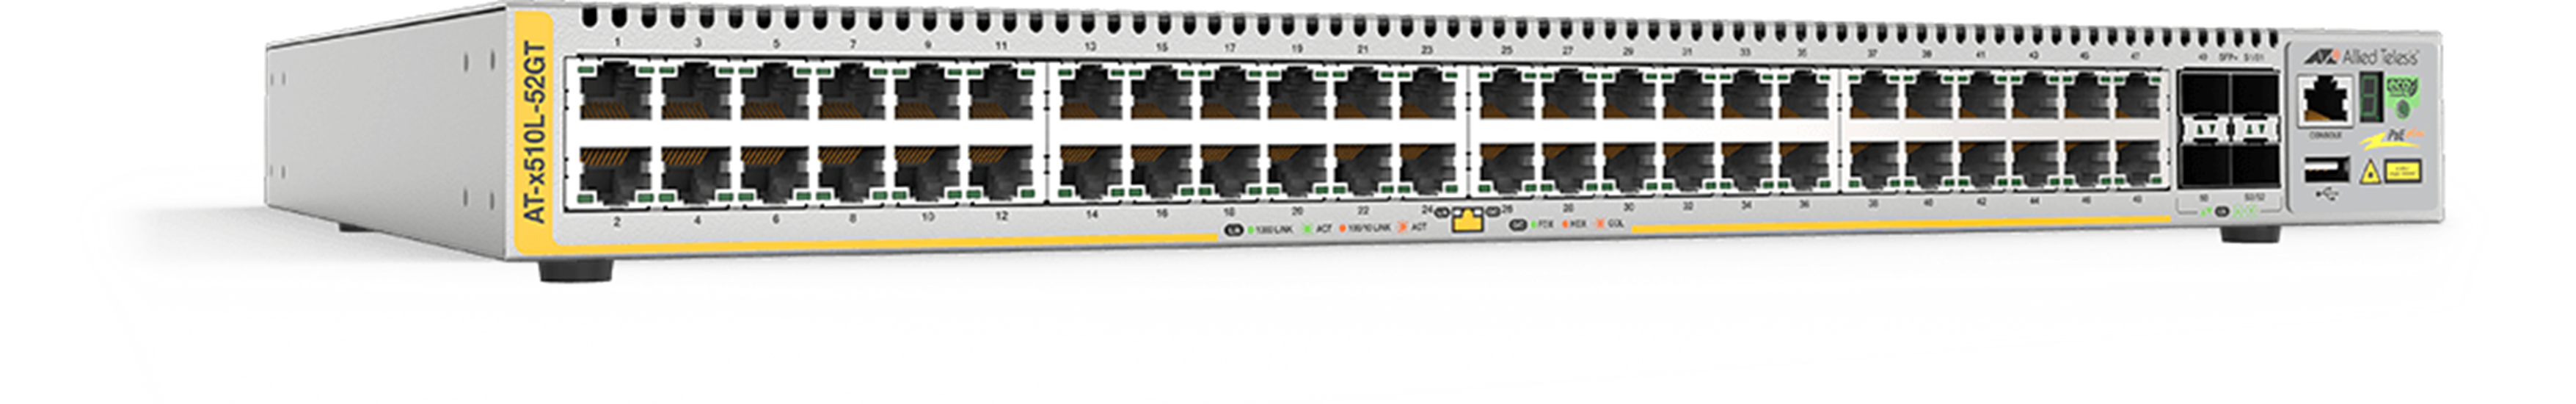 AT-x510 series - Advanced Gigabit Layer 3 Stackable Switch